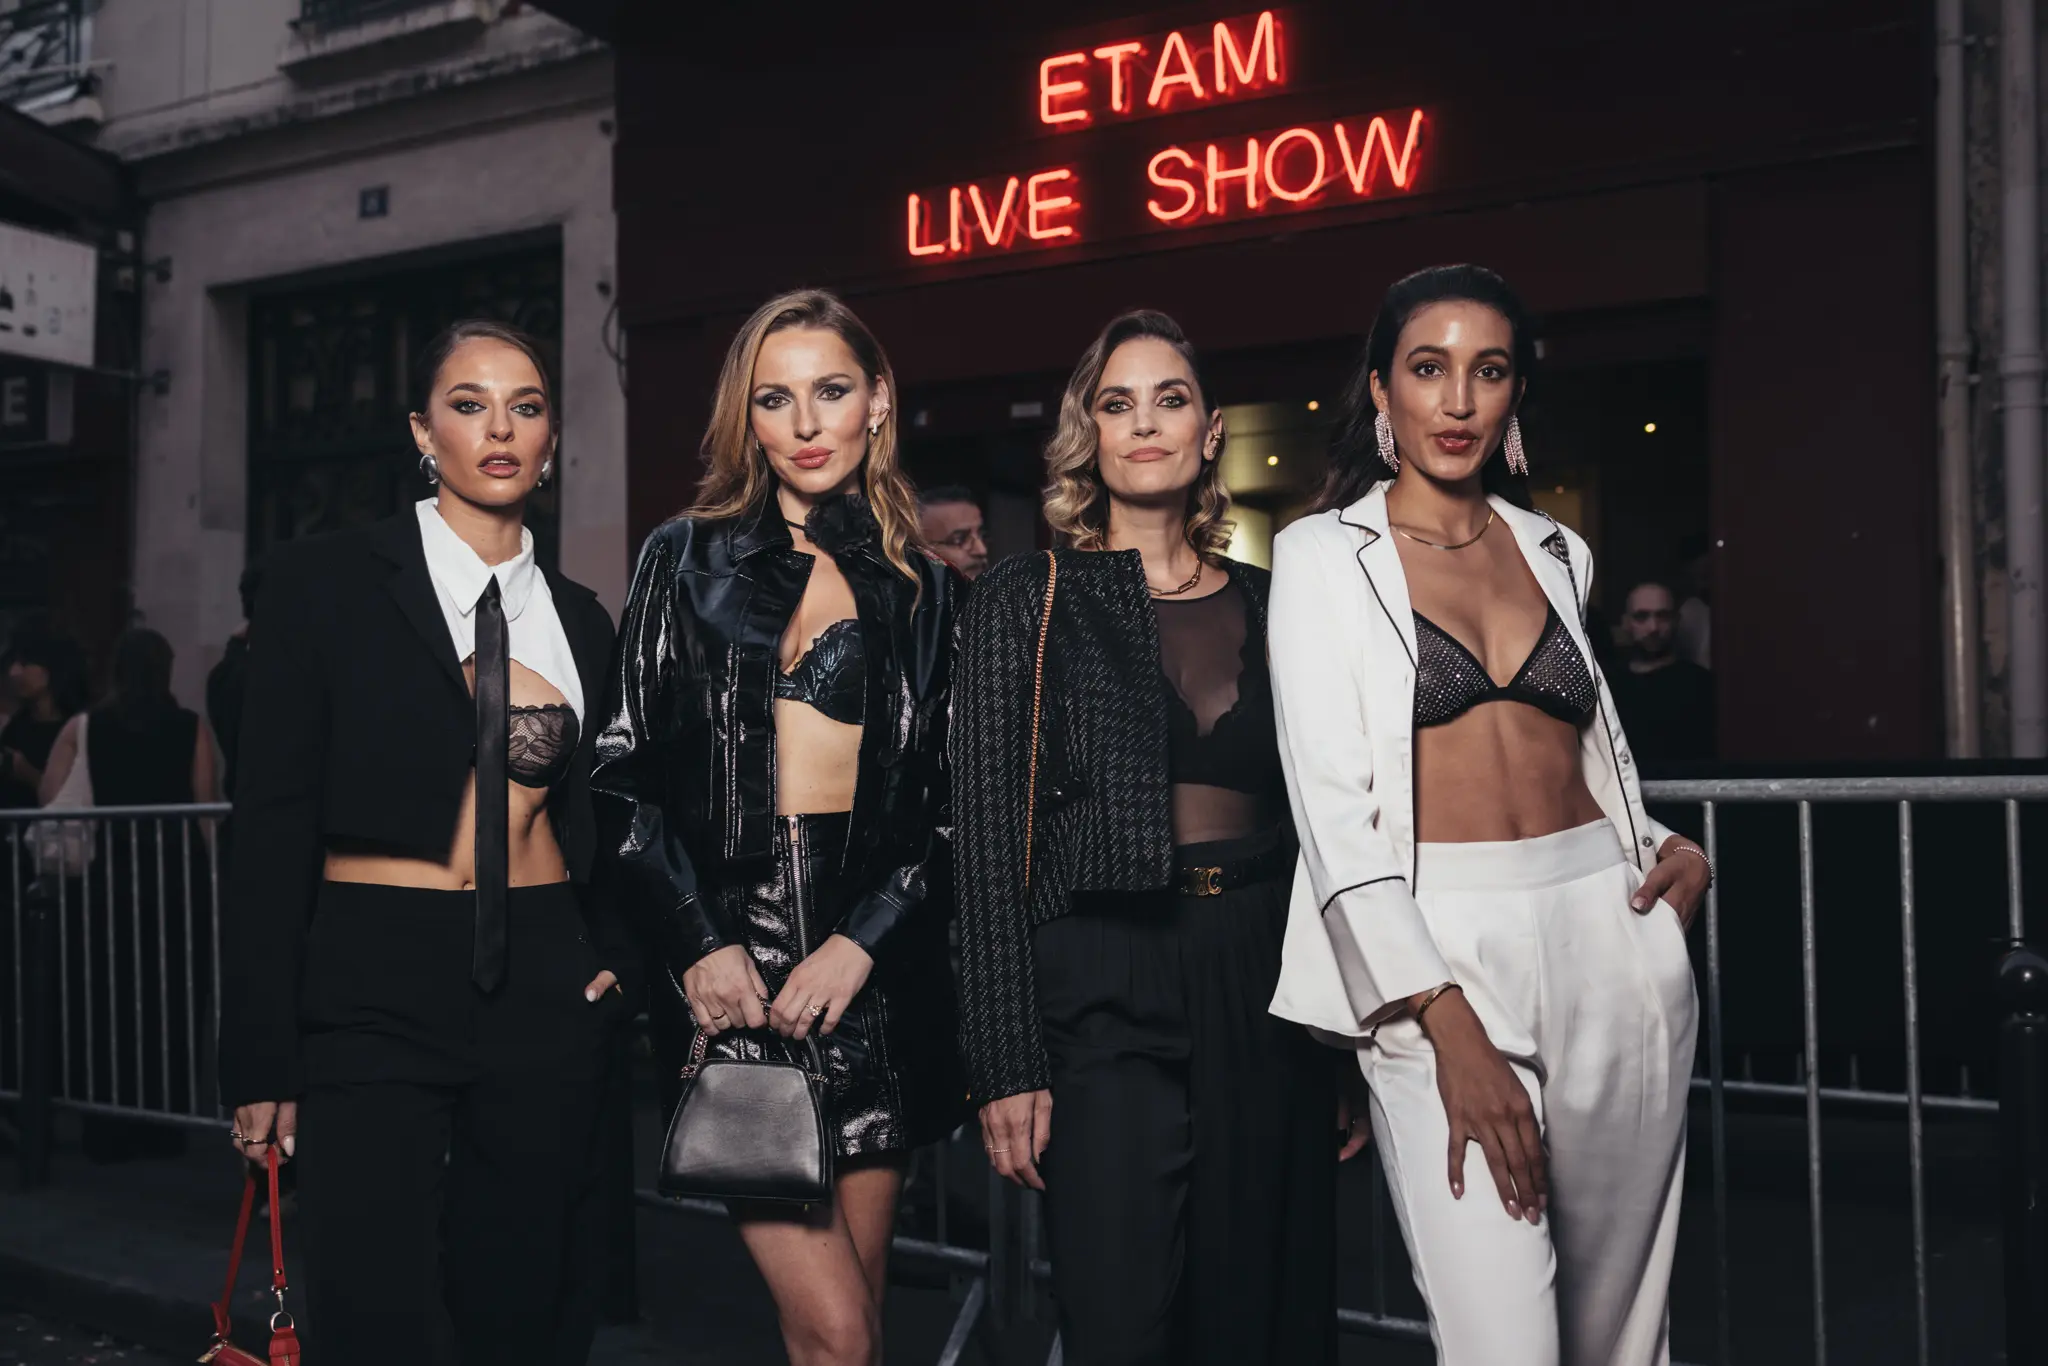 Etam's 80s-Inspired Extravaganza: A Dazzling Etam Live Show 2023 in Paris during PFW. Insights from the trip to Paris with the Swiss Ambassadors Team. 7